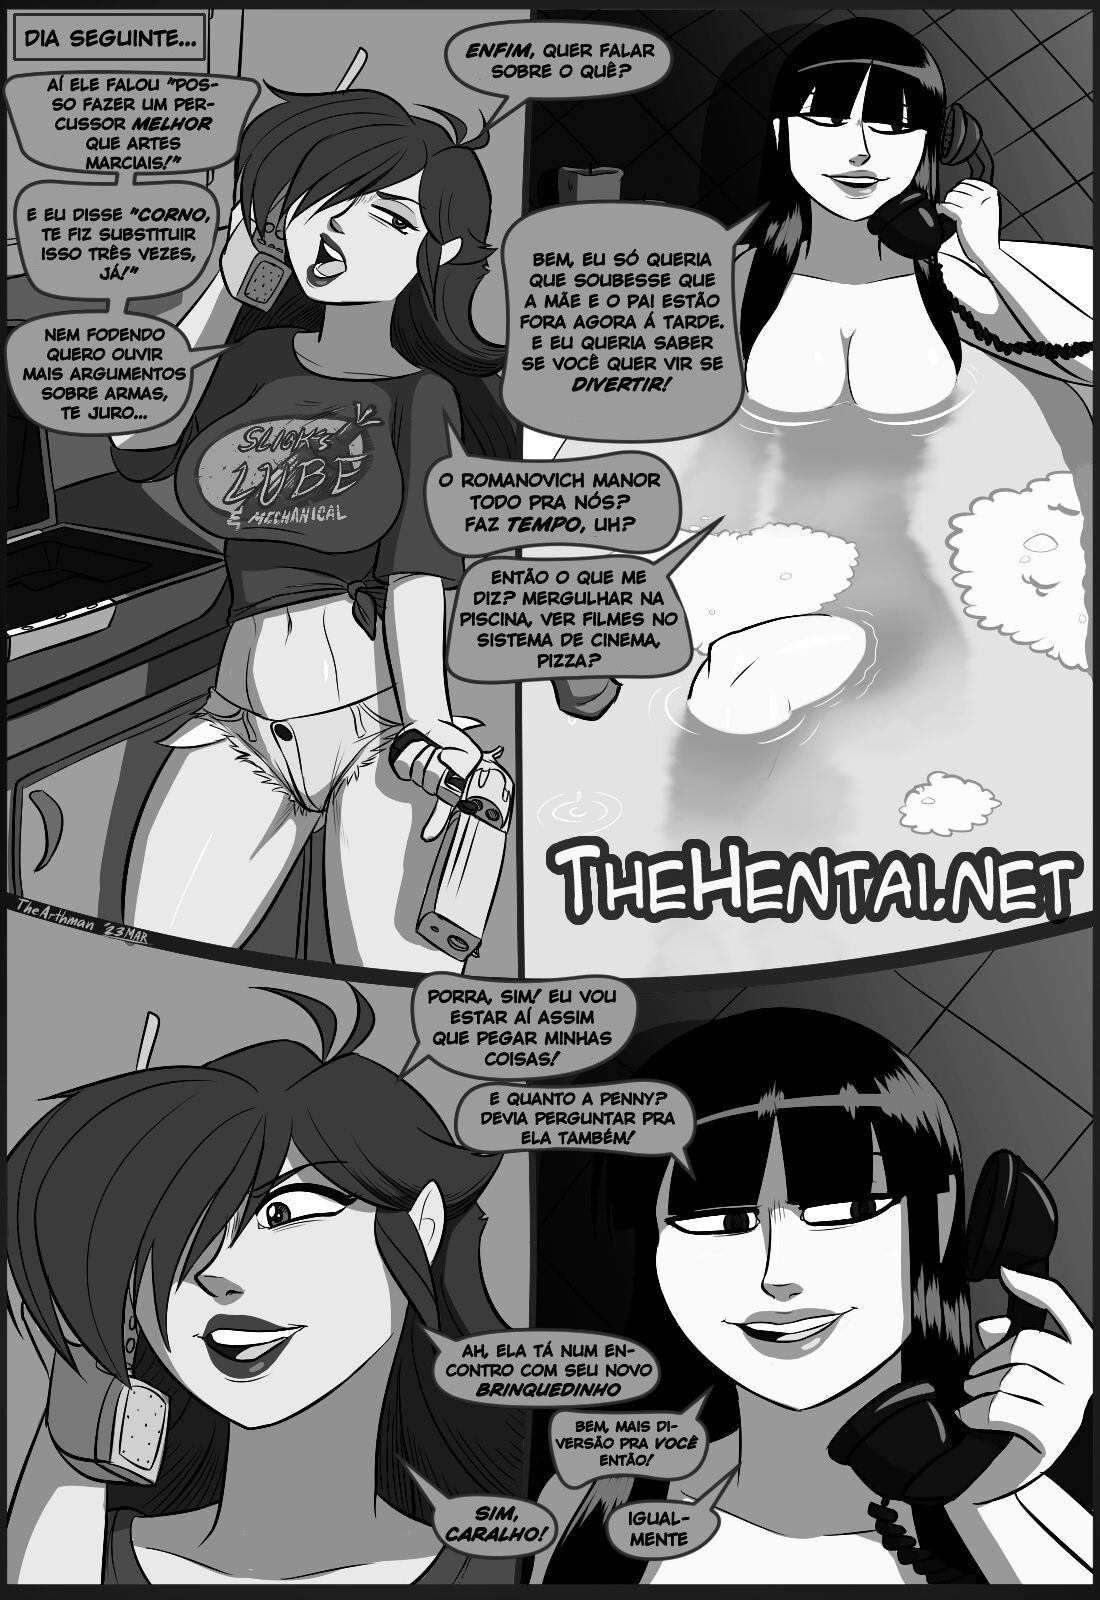 Dirtwater - Chapter 7 - Path of Sin Hentai pt-br 06